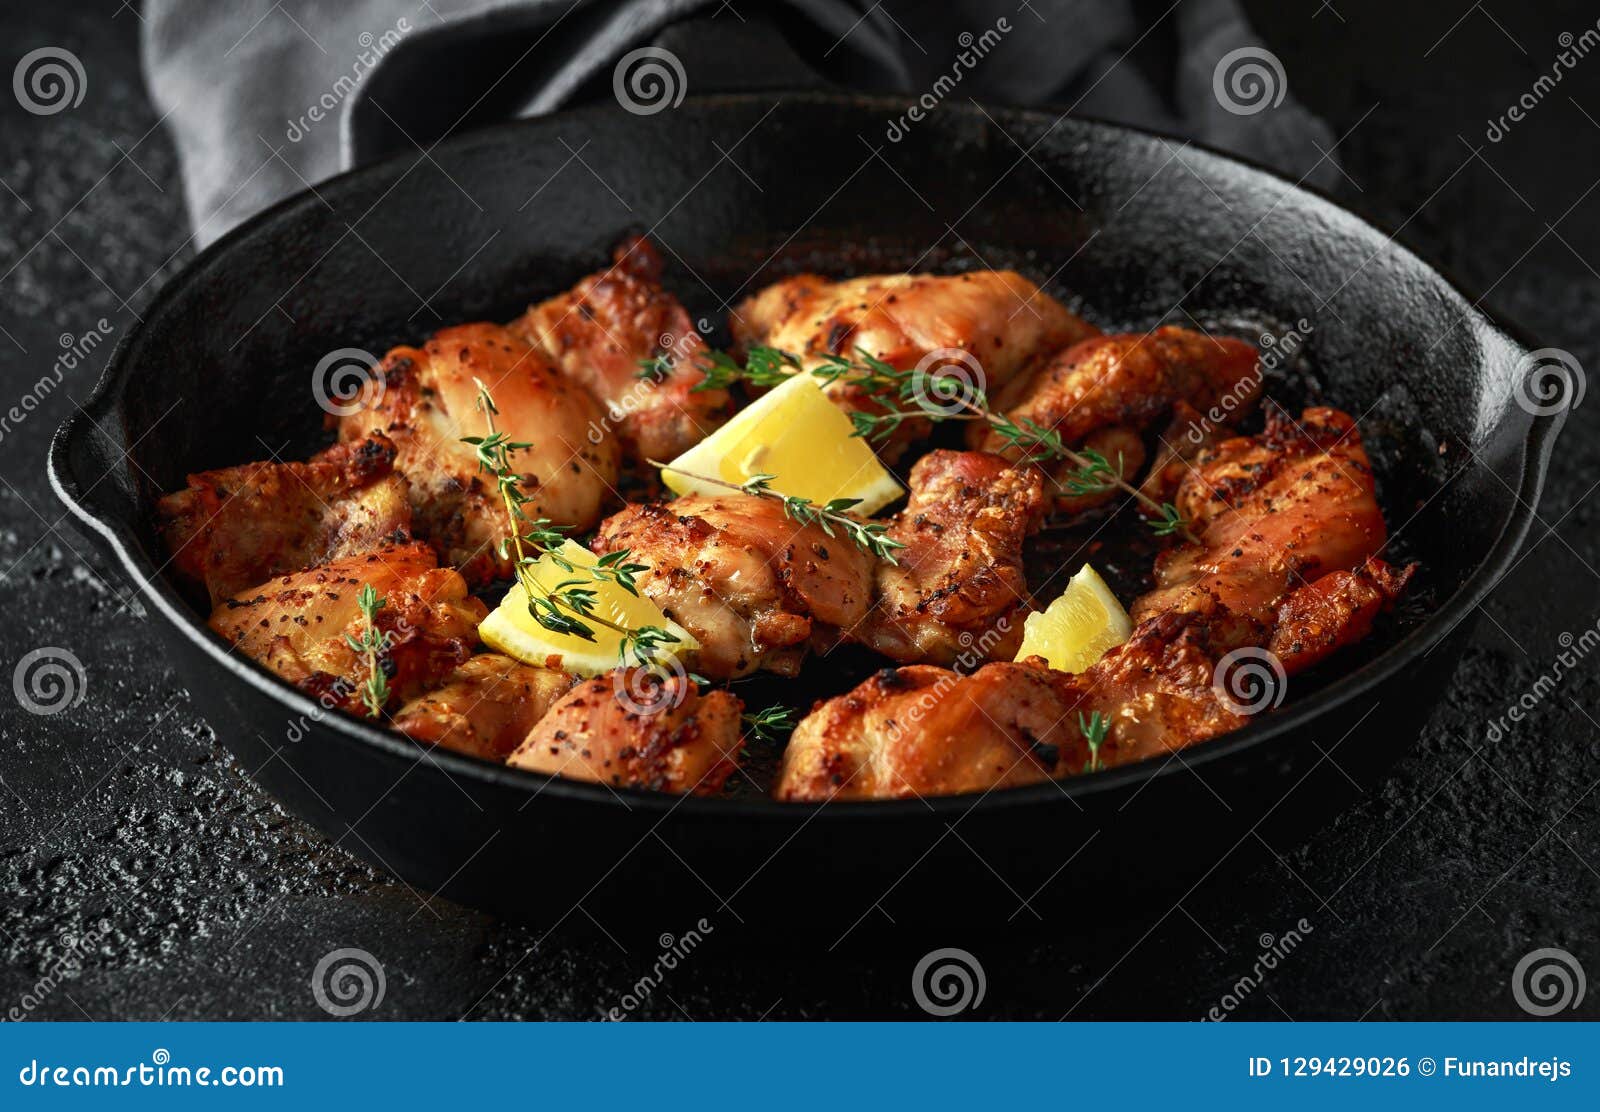 roasted boneless skinless chicken thighs in lemon and thyme dressing served in vintage cast iron skillet, frying pan